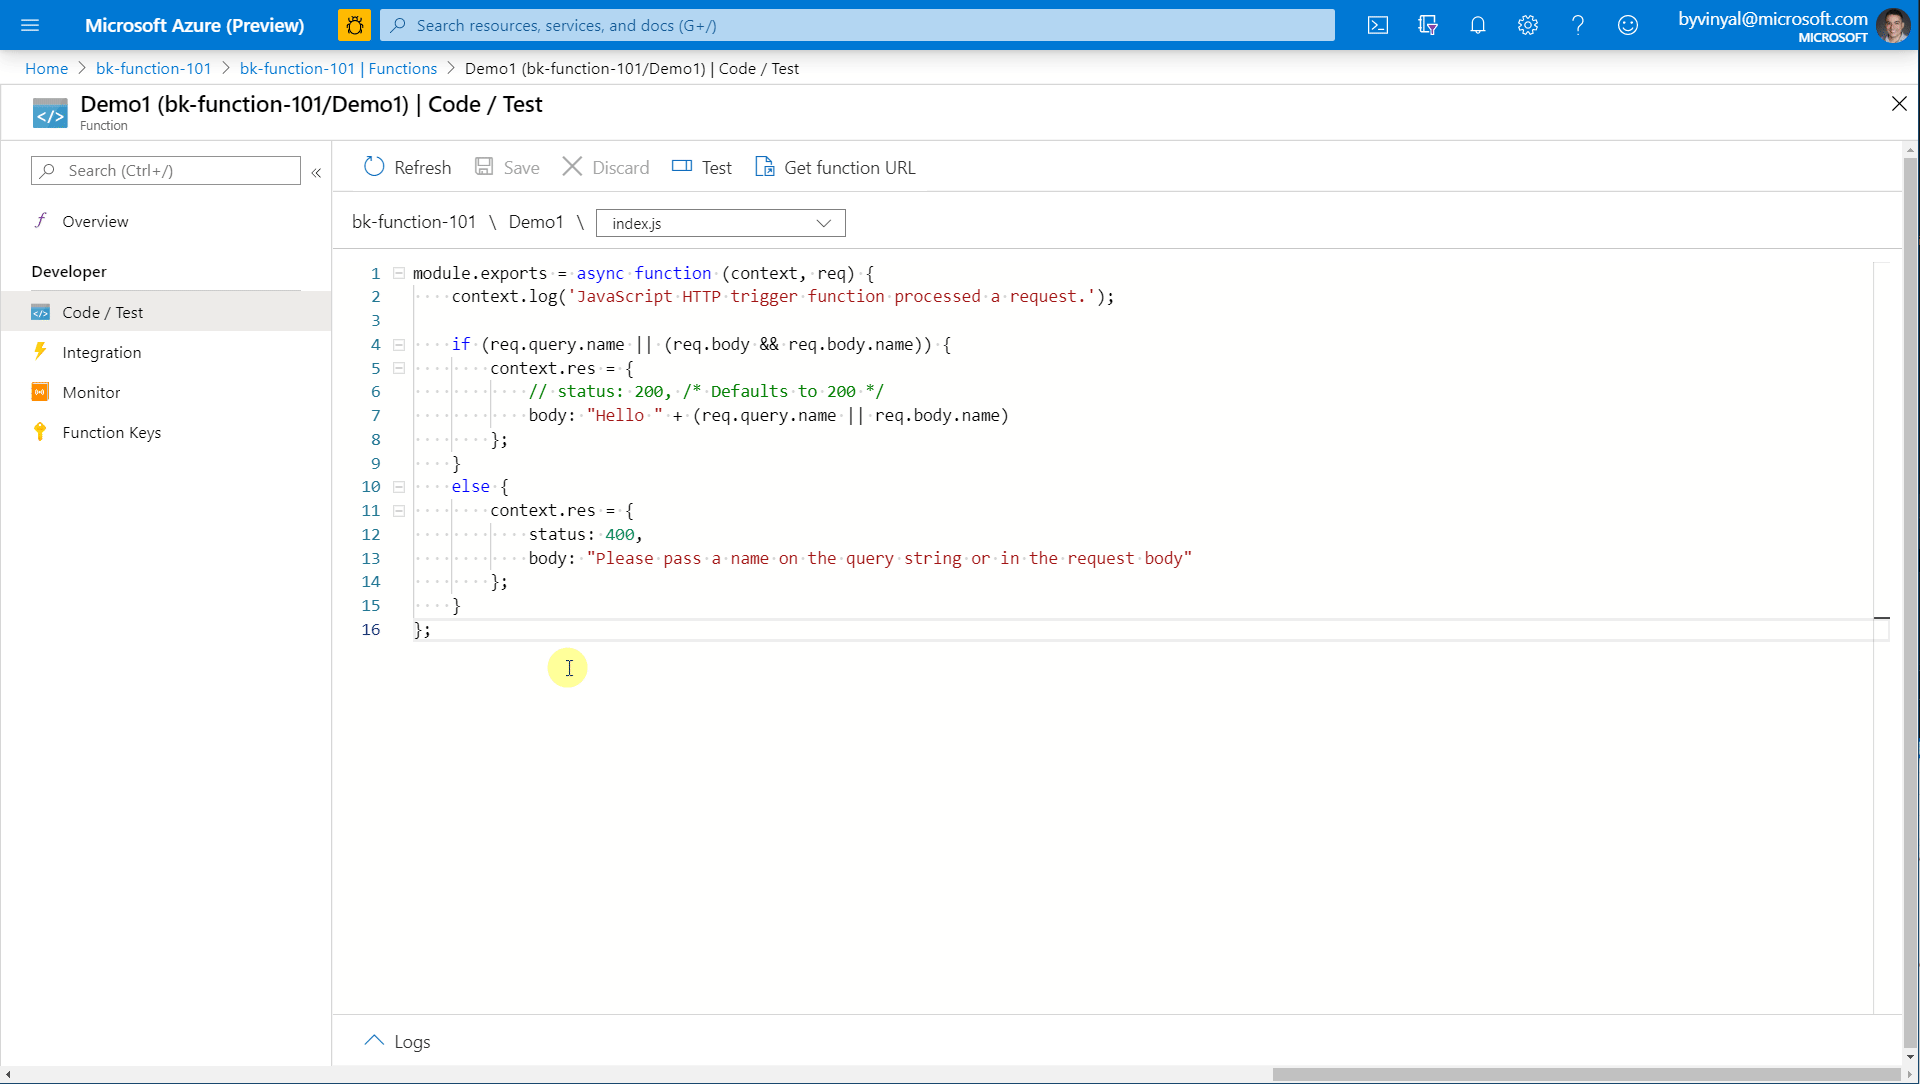 New functions test and logs